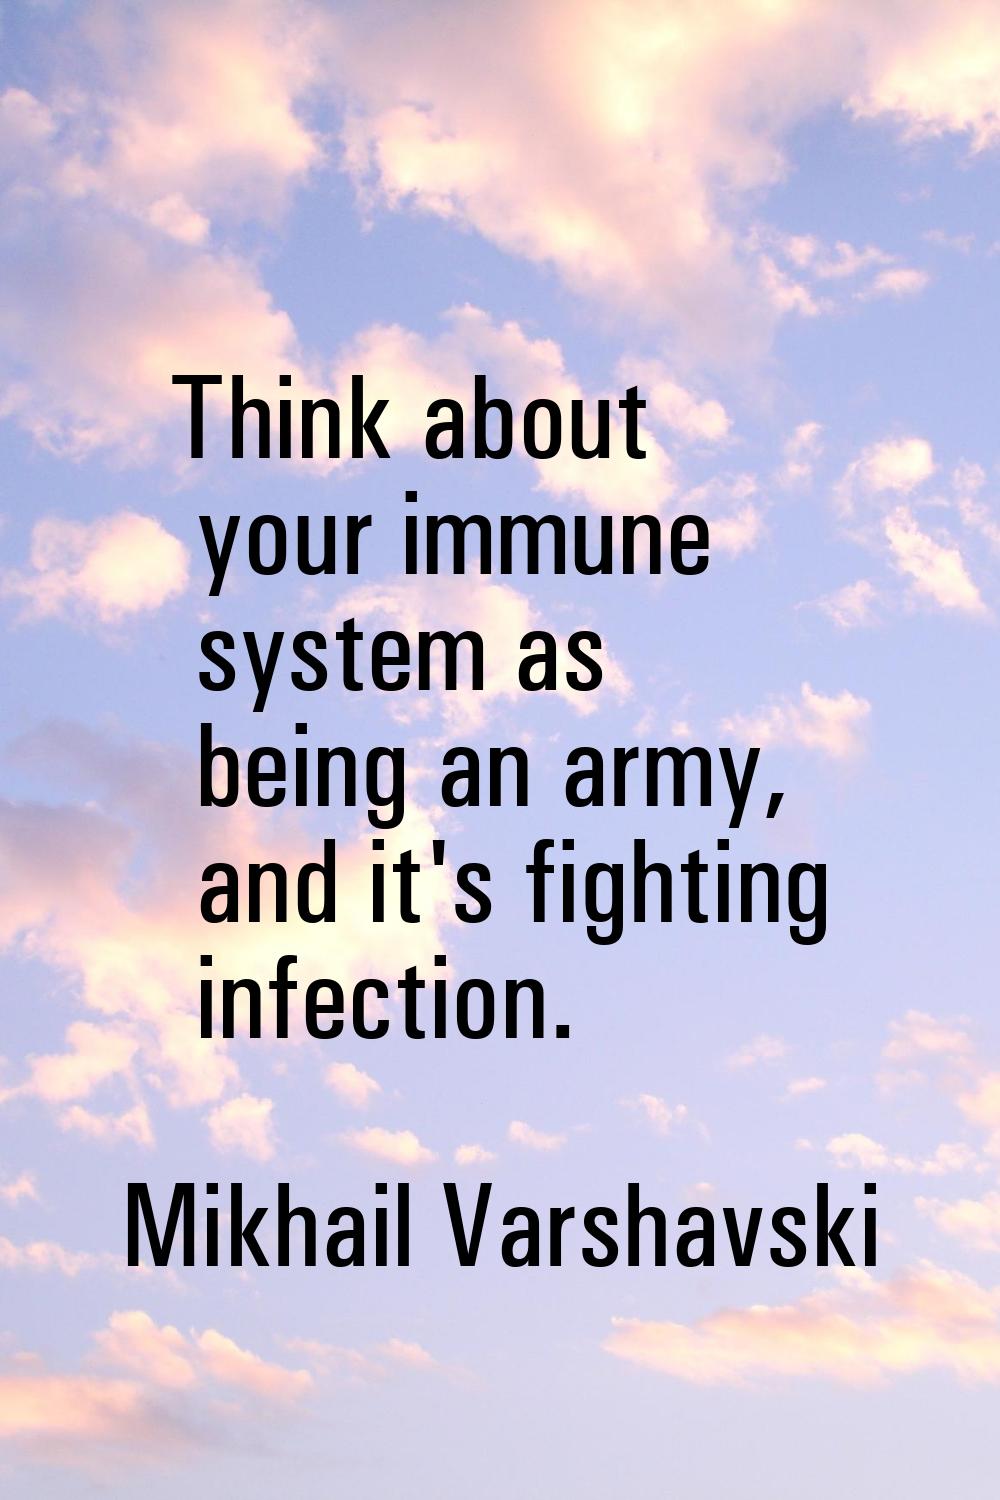 Think about your immune system as being an army, and it's fighting infection.